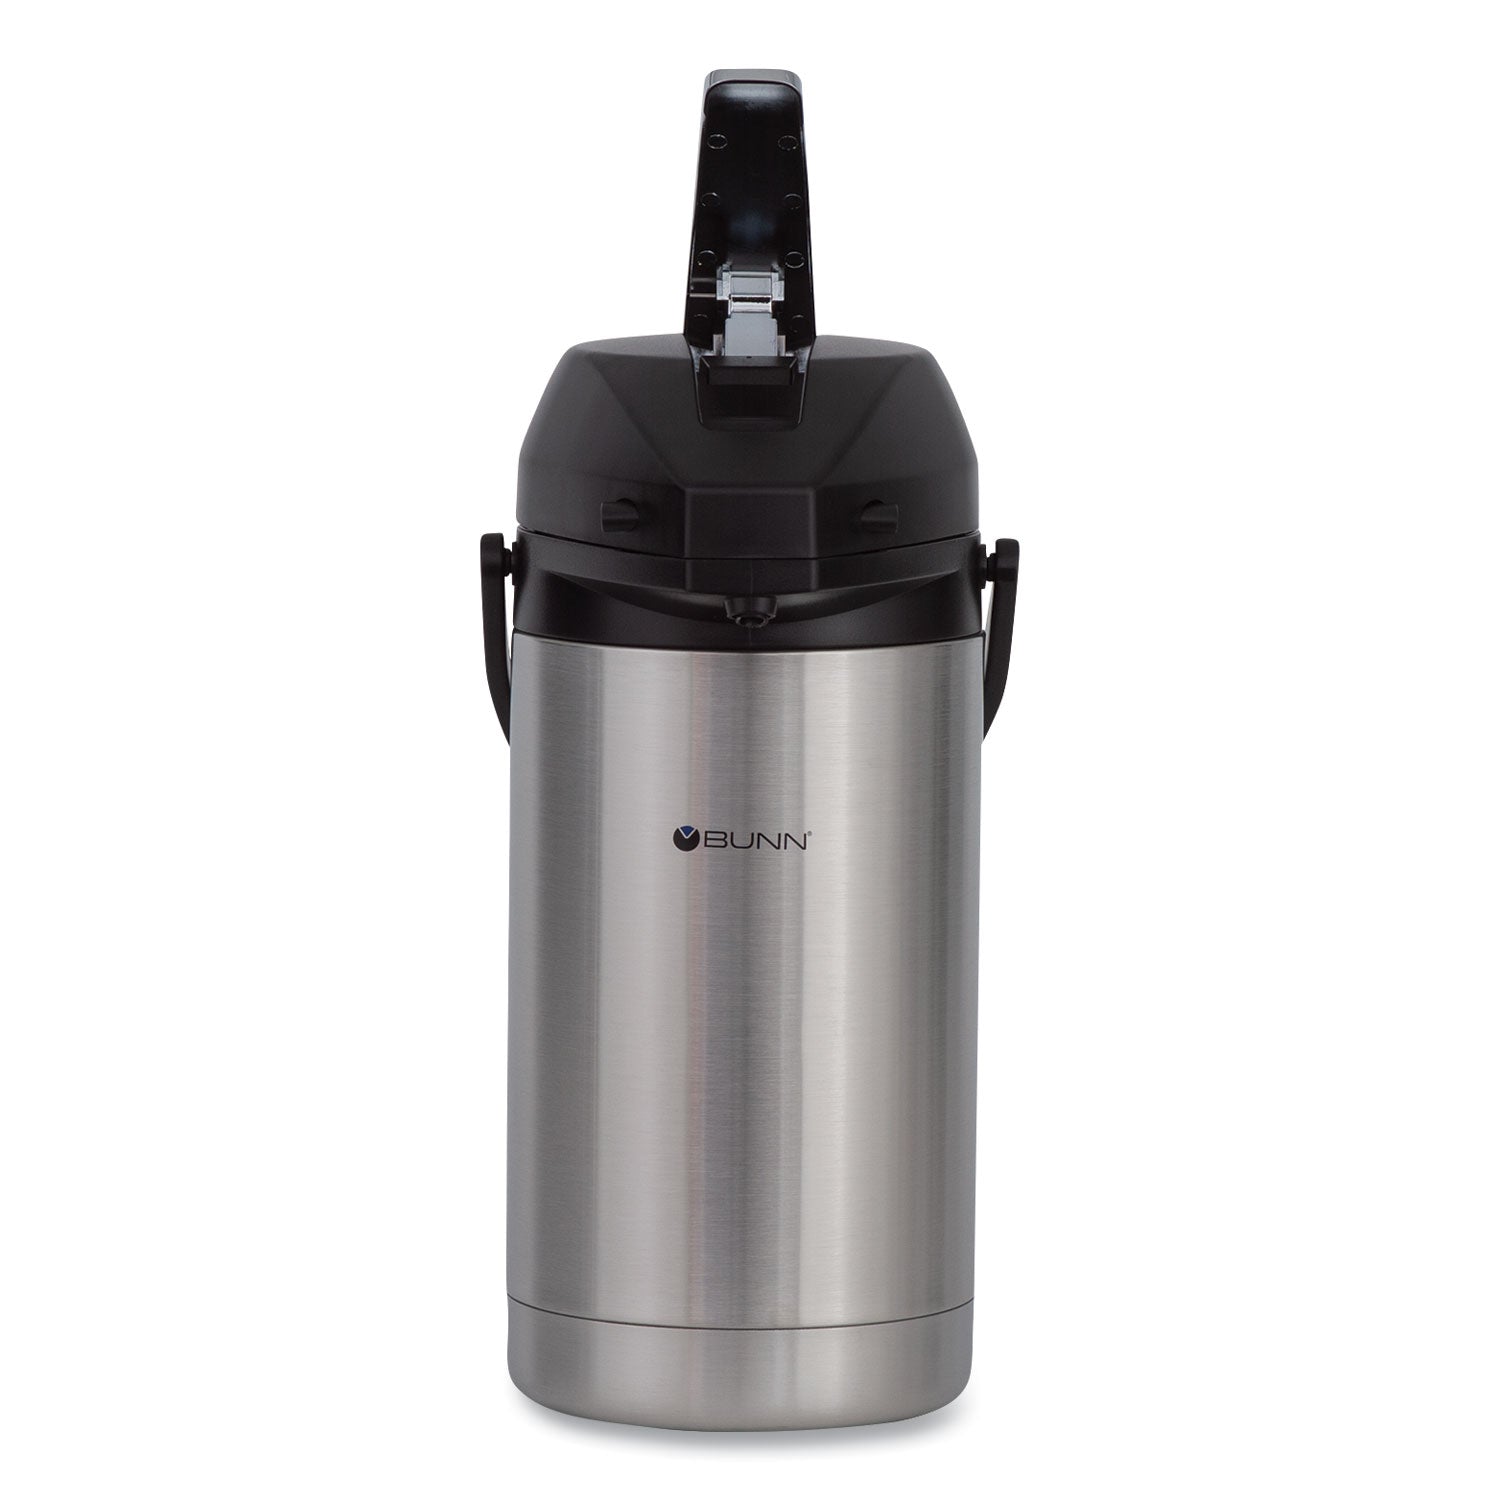 3 Liter Lever Action Airpot, Stainless Steel/Black - 